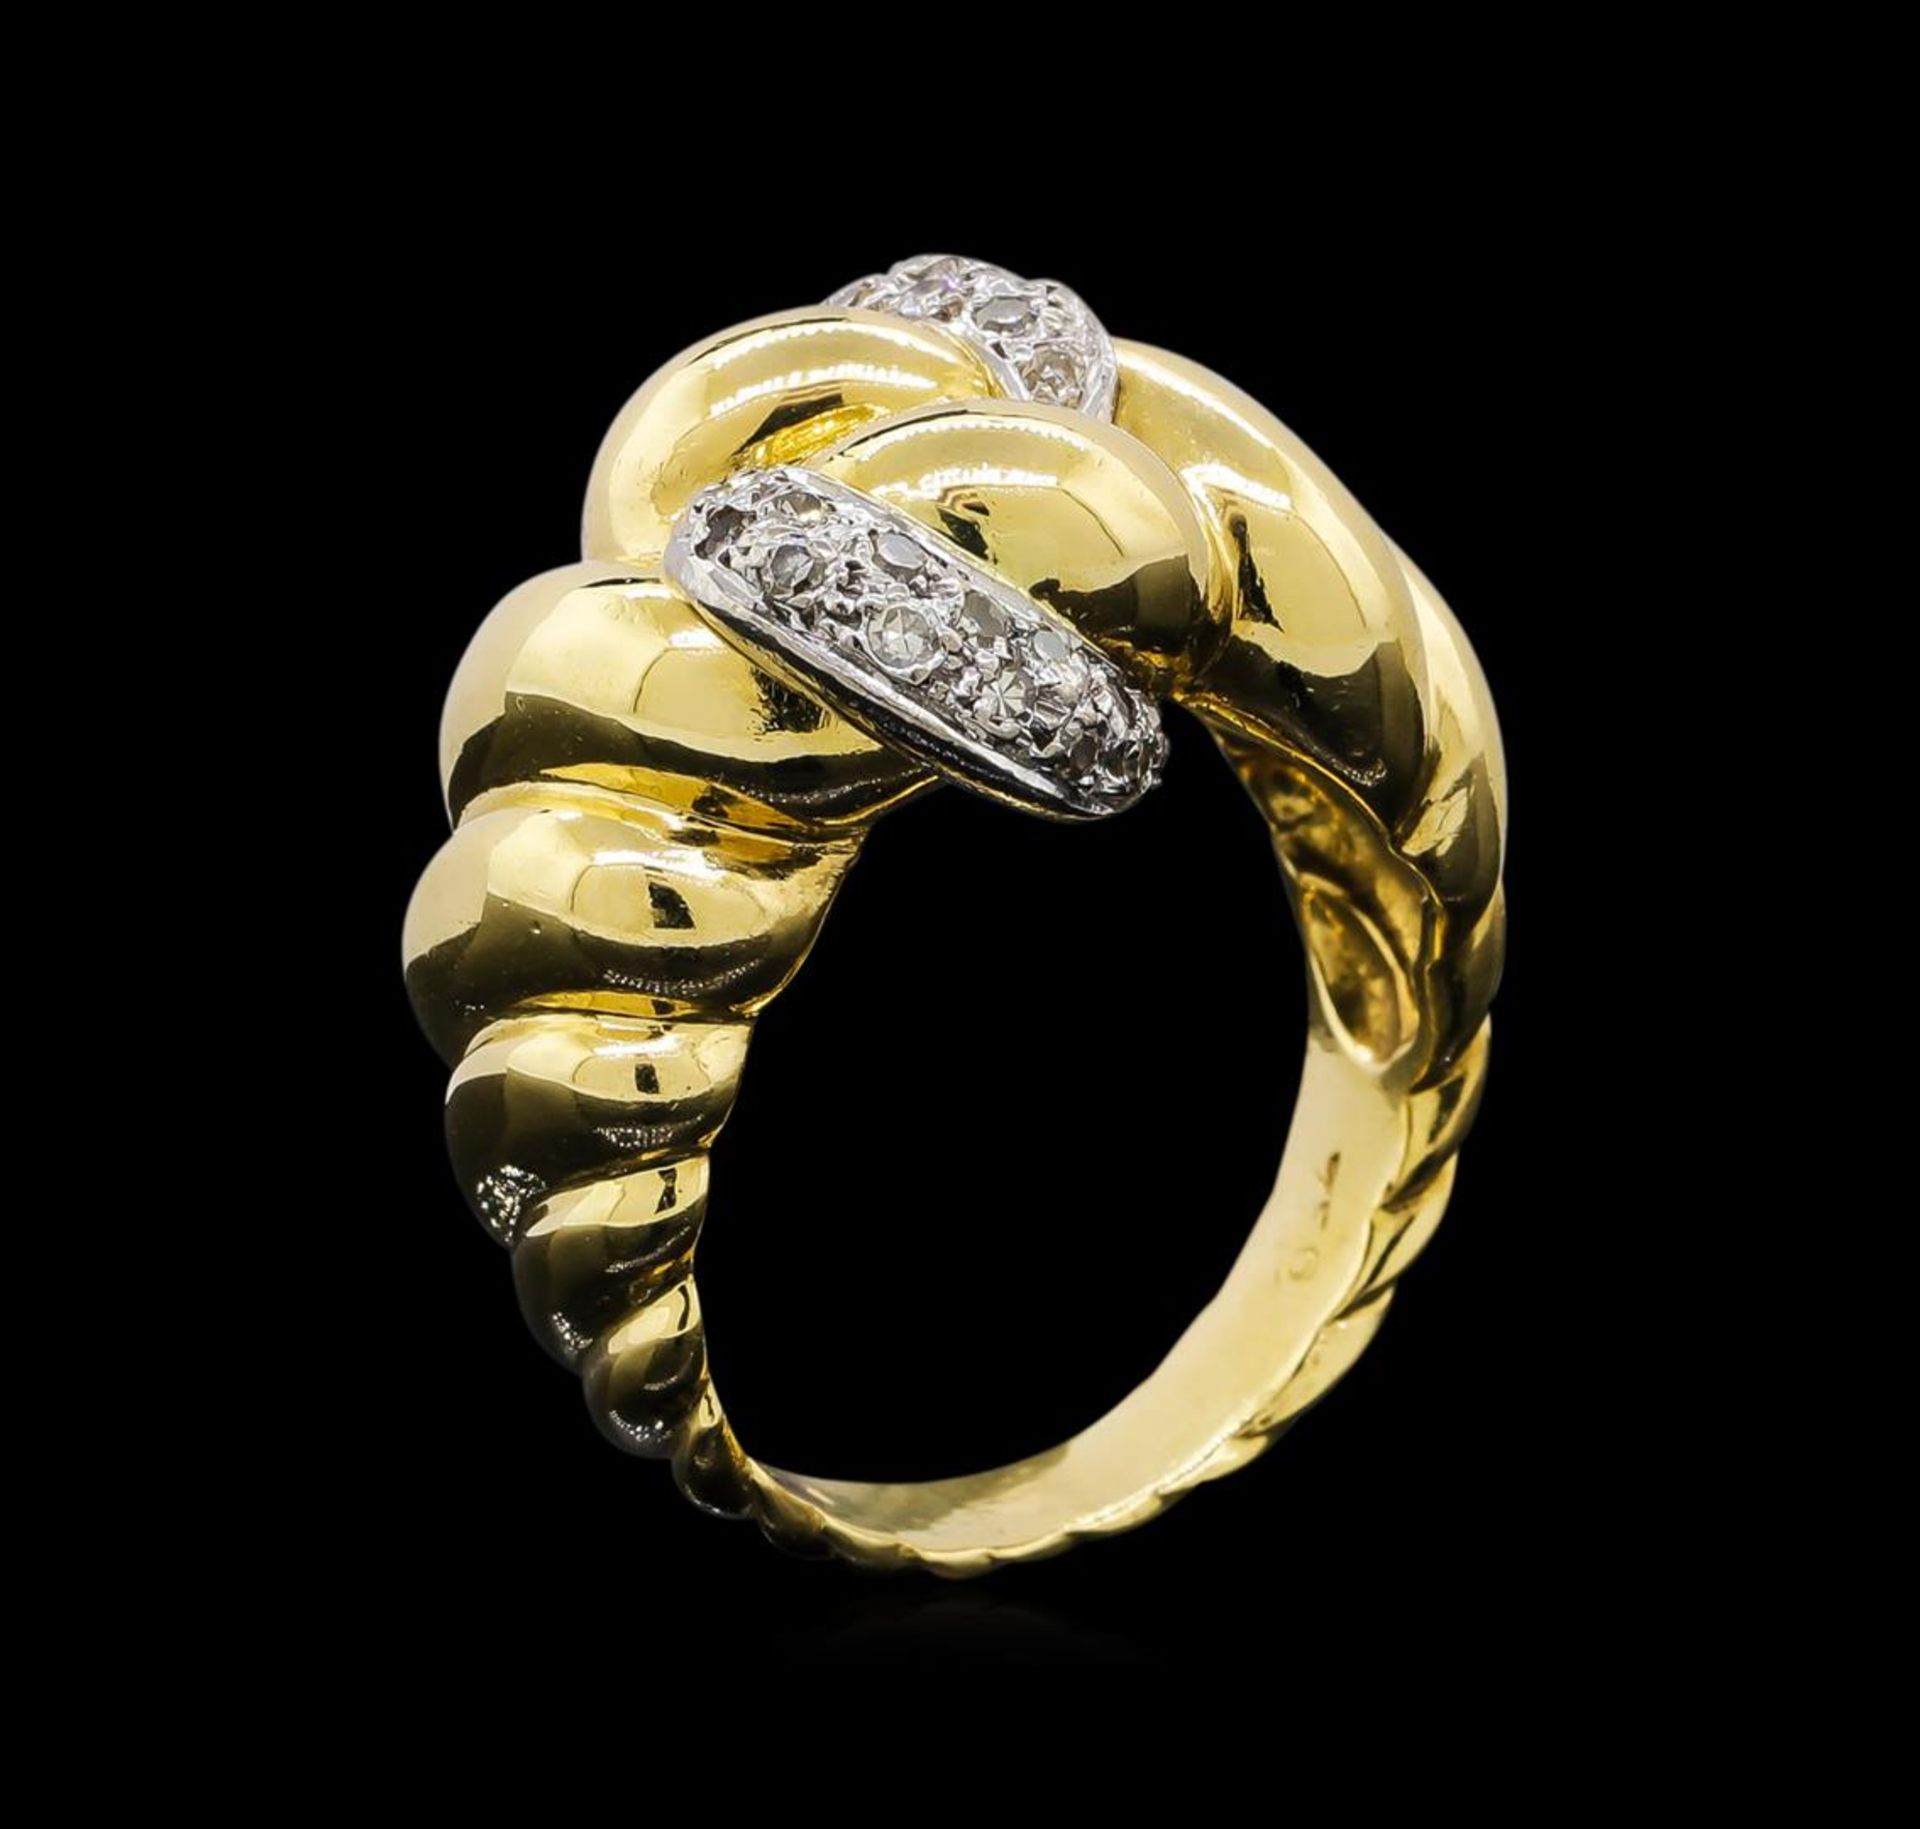 18KT Two-Tone Gold 0.43 ctw Diamond Ring - Image 4 of 5